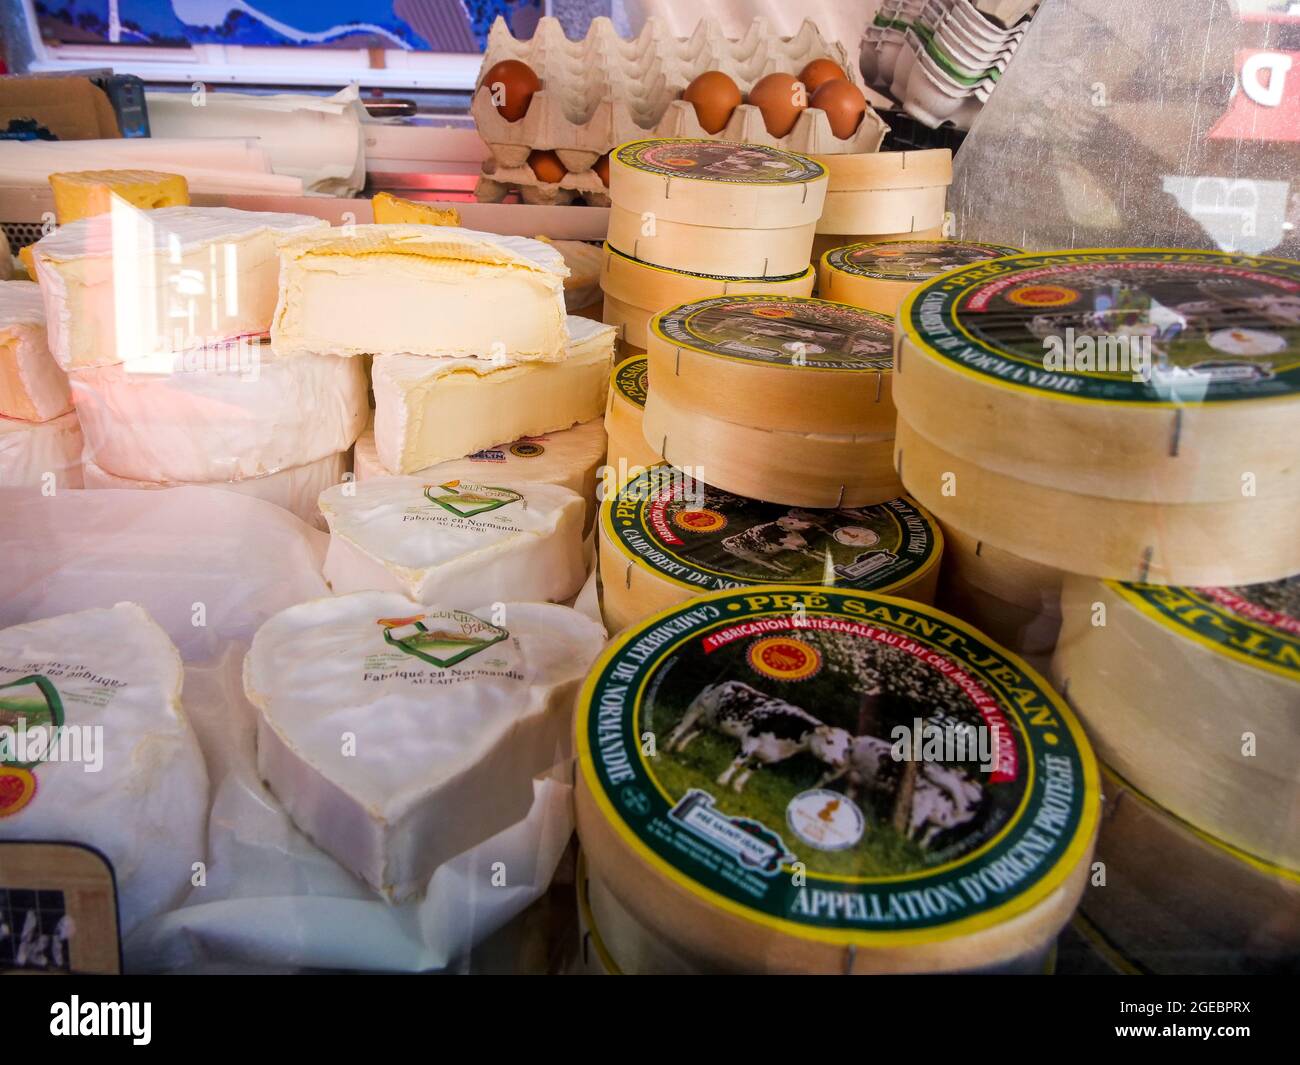 Cheese on a cheese maker stall, open air market, Saint-Vaast la Hougue, Manche department, Cotentin, Normandy region, France Stock Photo